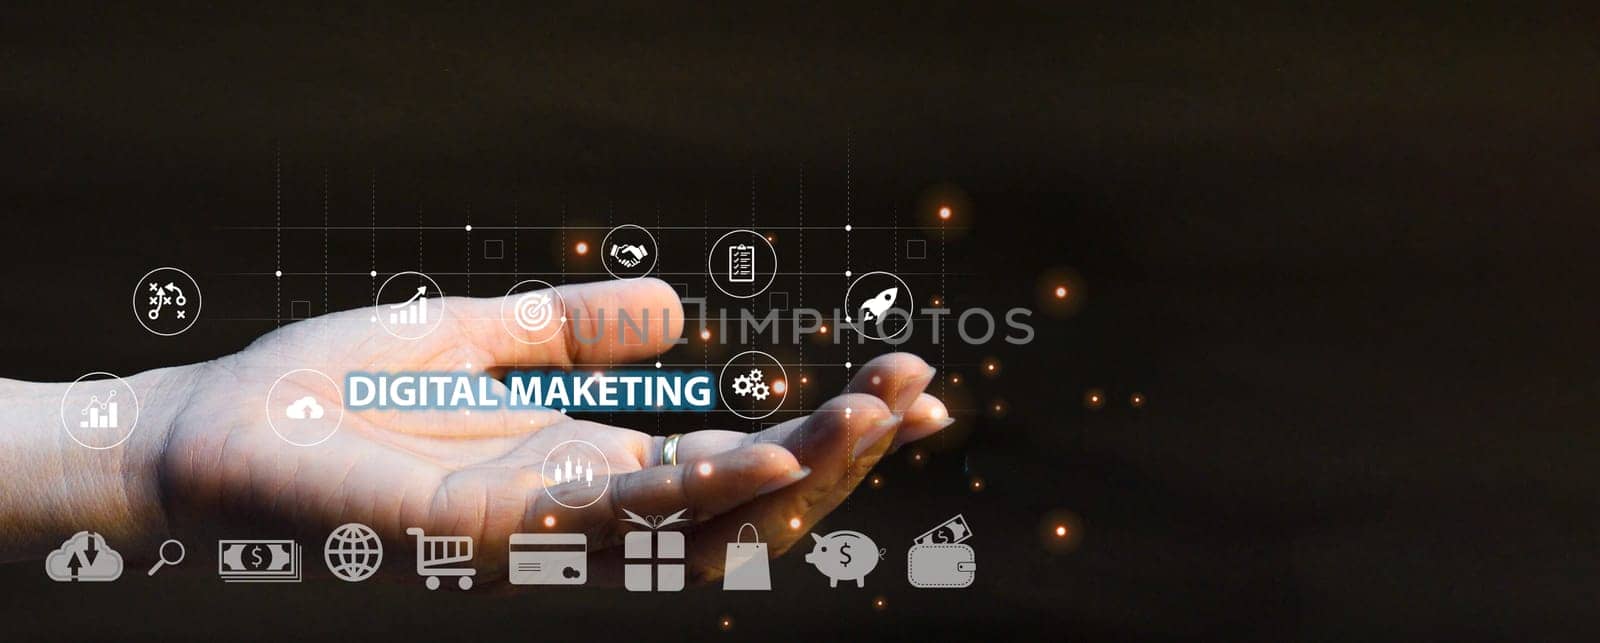 Hand showing signs and icons of digital marketing, internet advertising and business technology concept, online marketing, e-commerce online. by boonruen